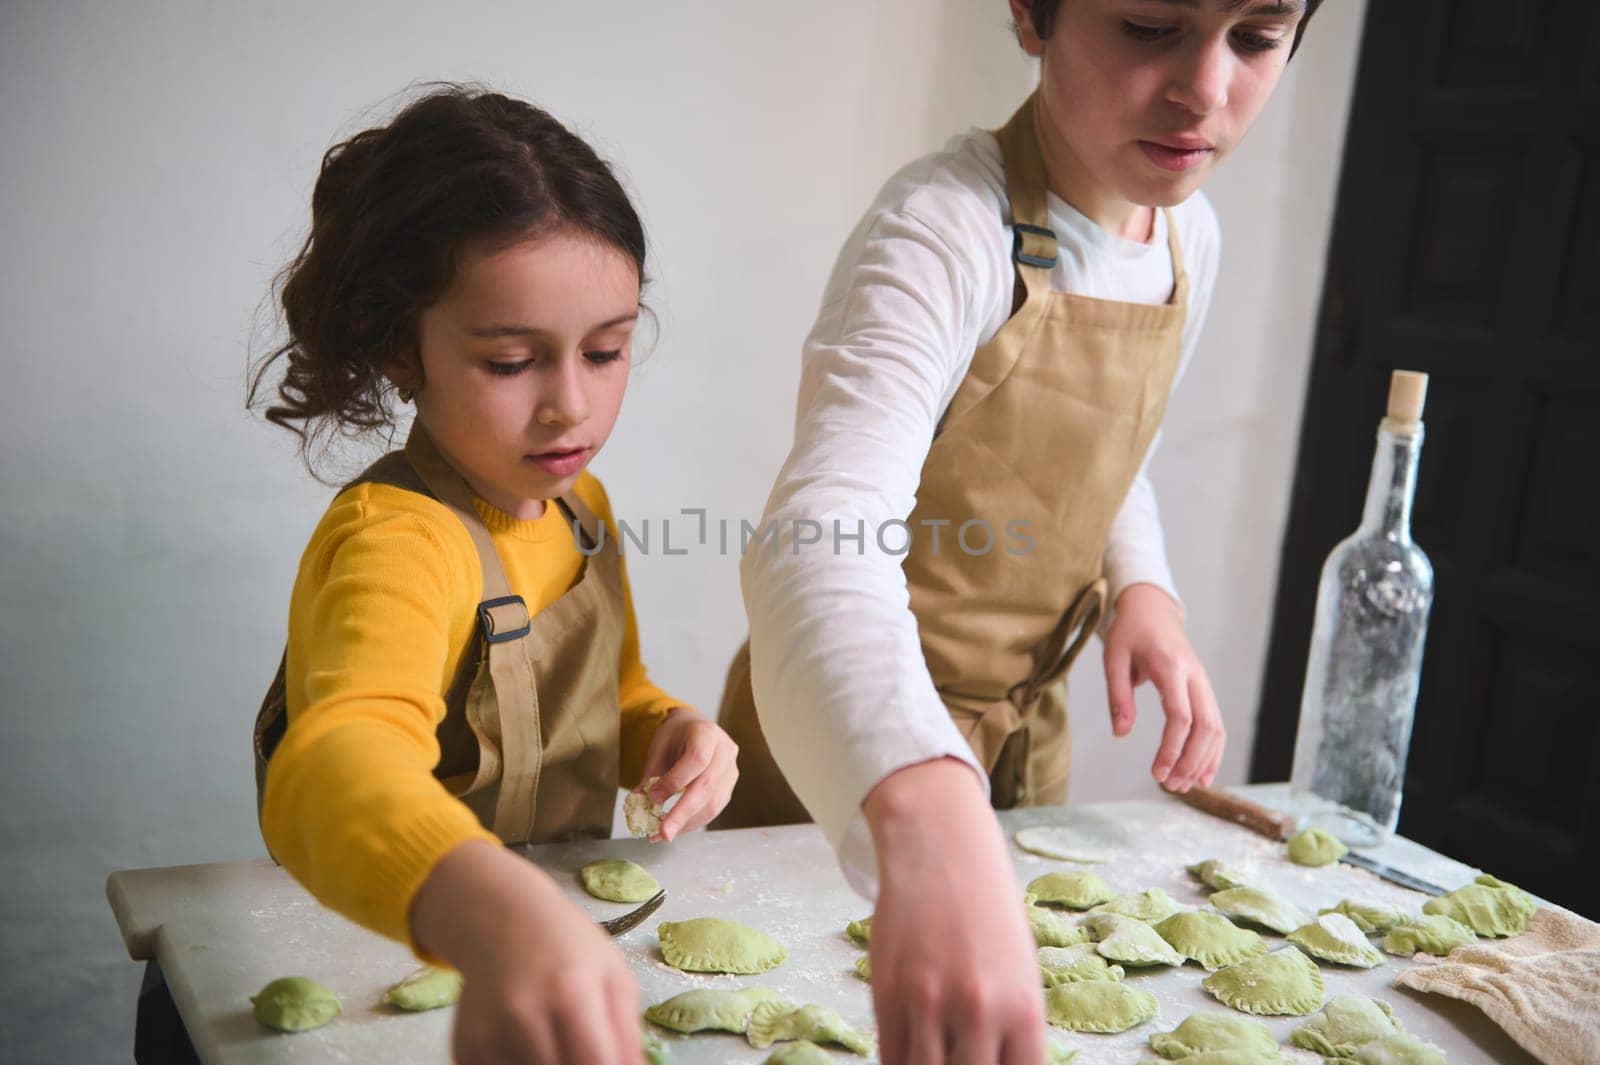 Boy and girl making dumplings, standing at floured kitchen table in the rustic kitchen interior. Cooking class for kids. Preparing ravioli, pelmeni, varennyky according to traditional recipe by artgf